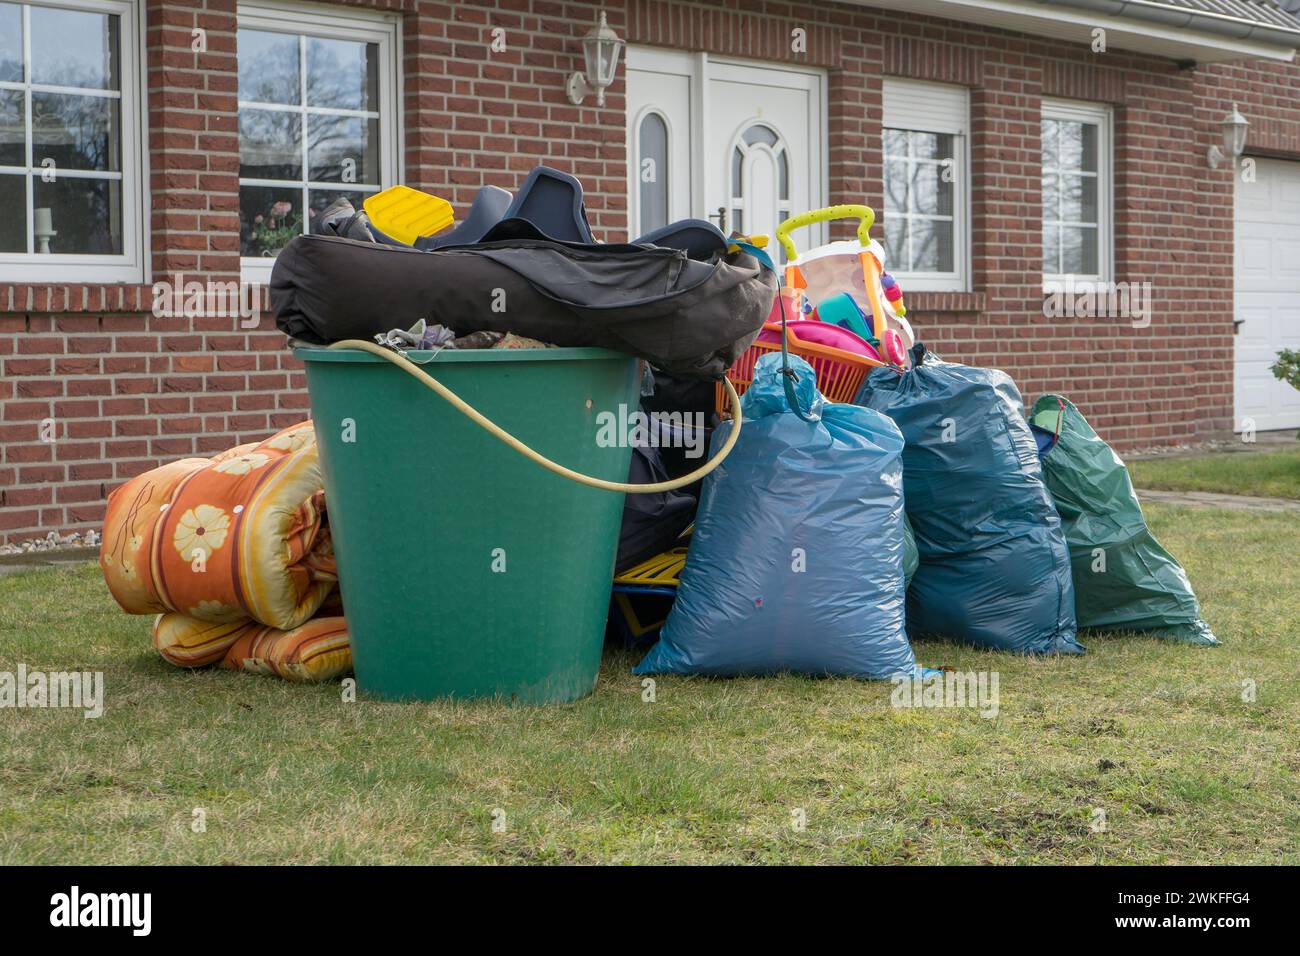 Pile of bulky waste in front of a house with garbage bags and rain barrels Stock Photo